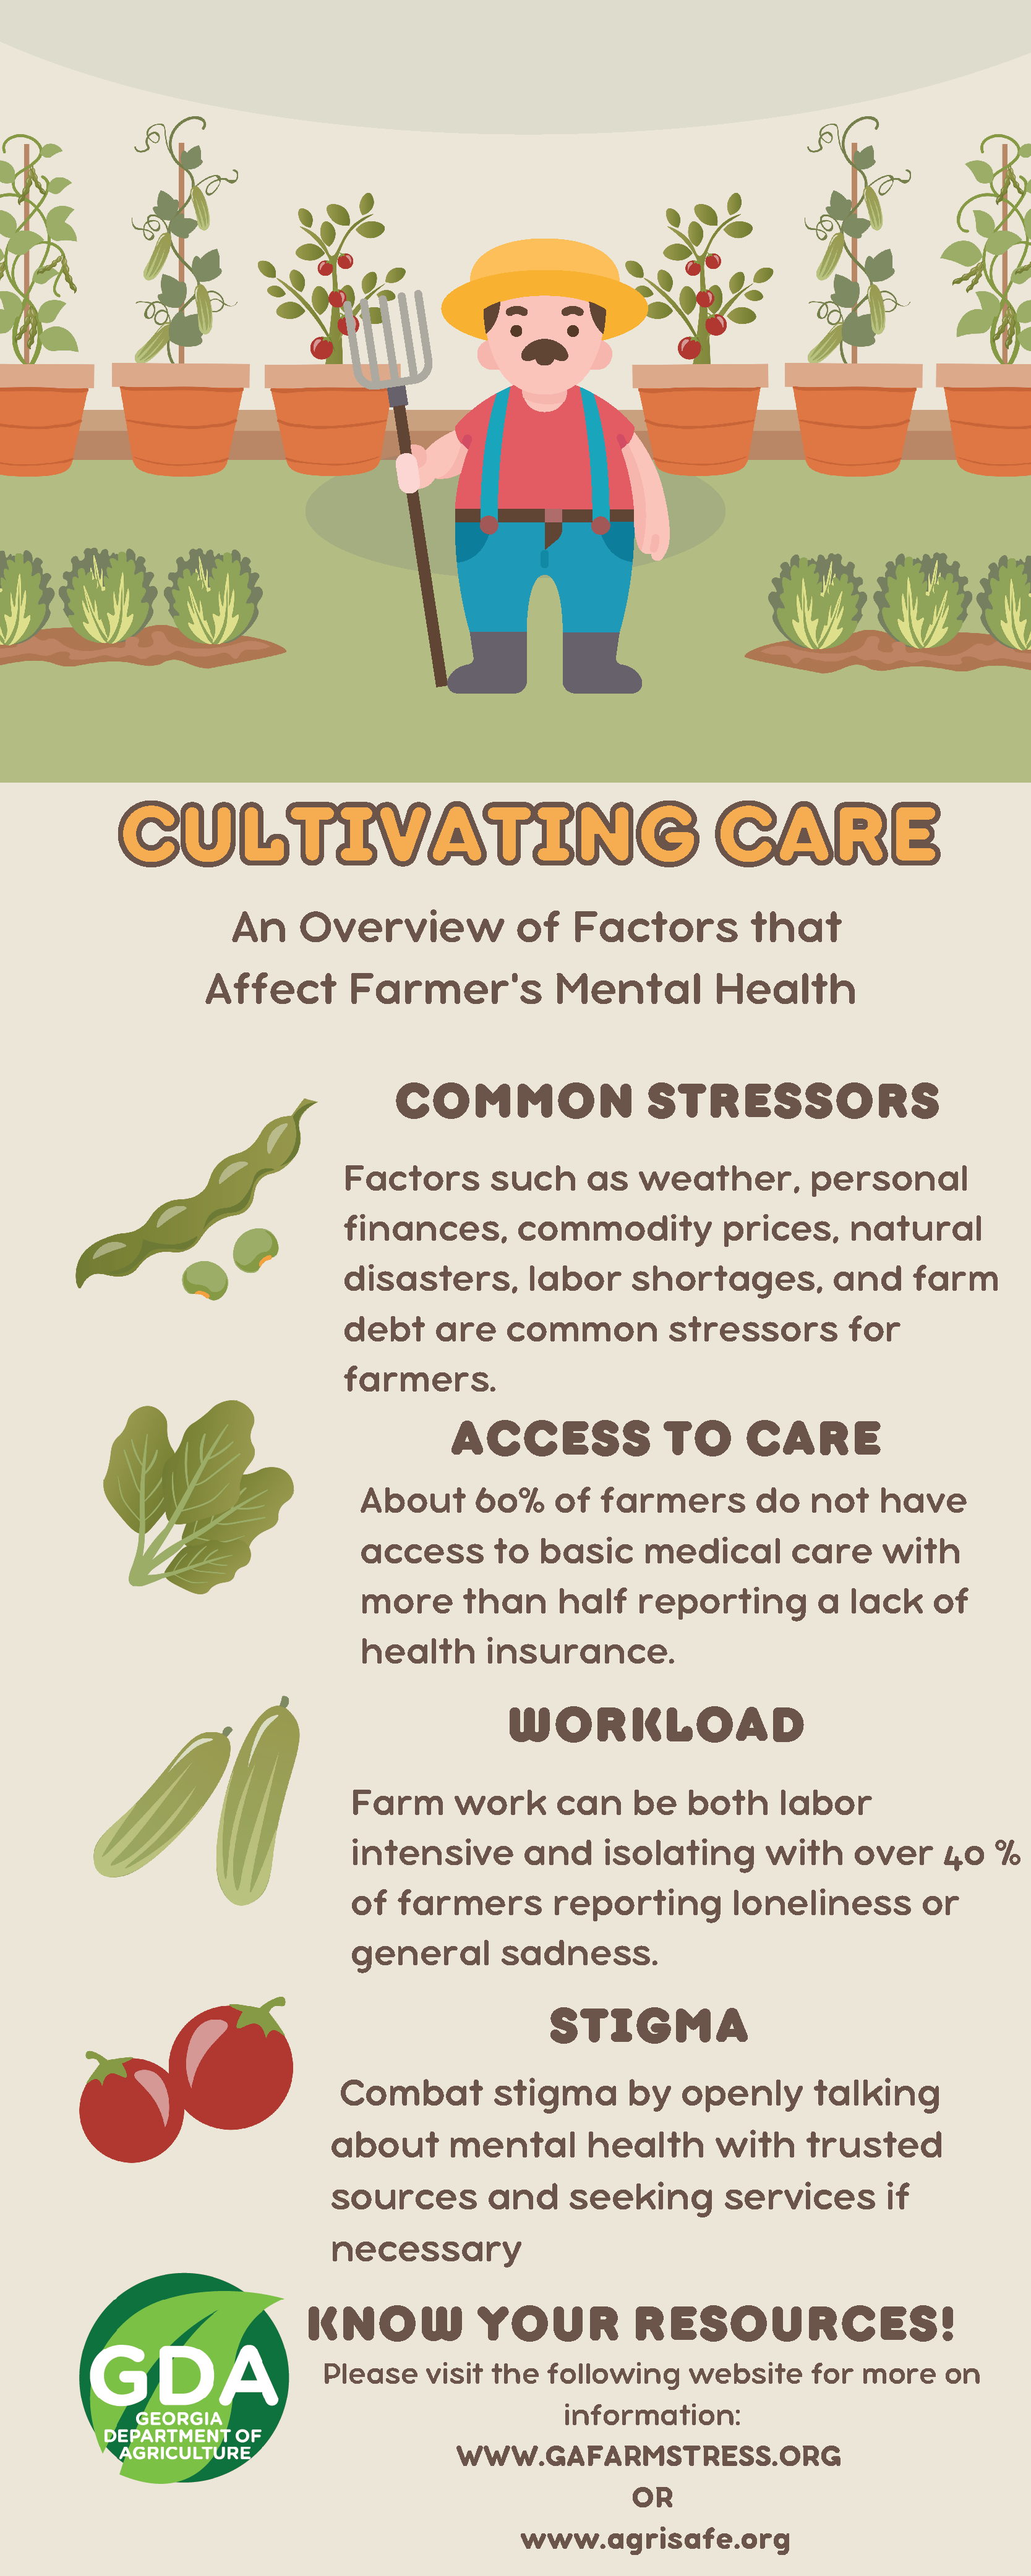  Cultivating Care:Factors That Affect Farmer's Mental Health